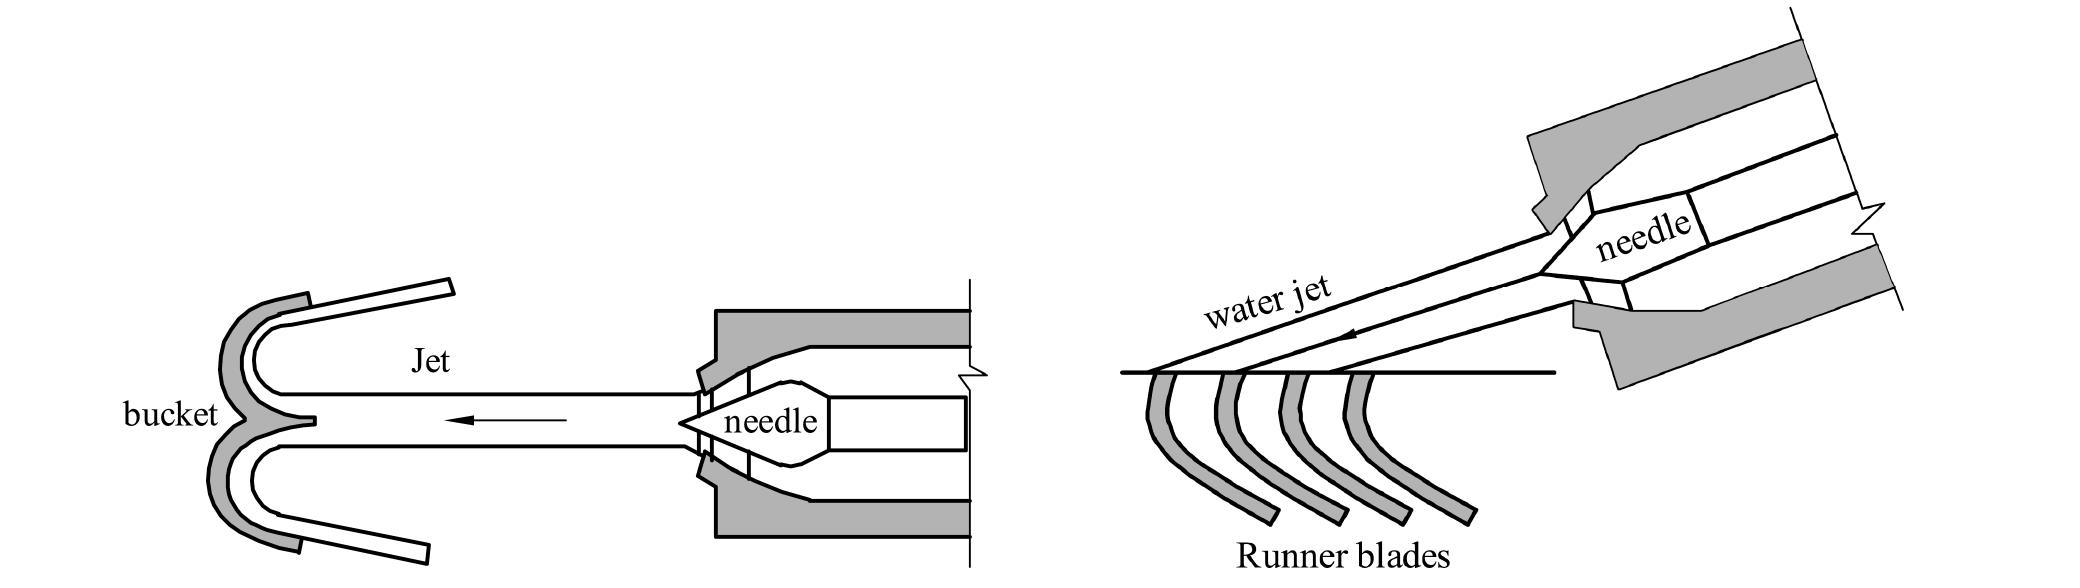 1.3.5 According to the Pressure Change of Liquid through the Runner